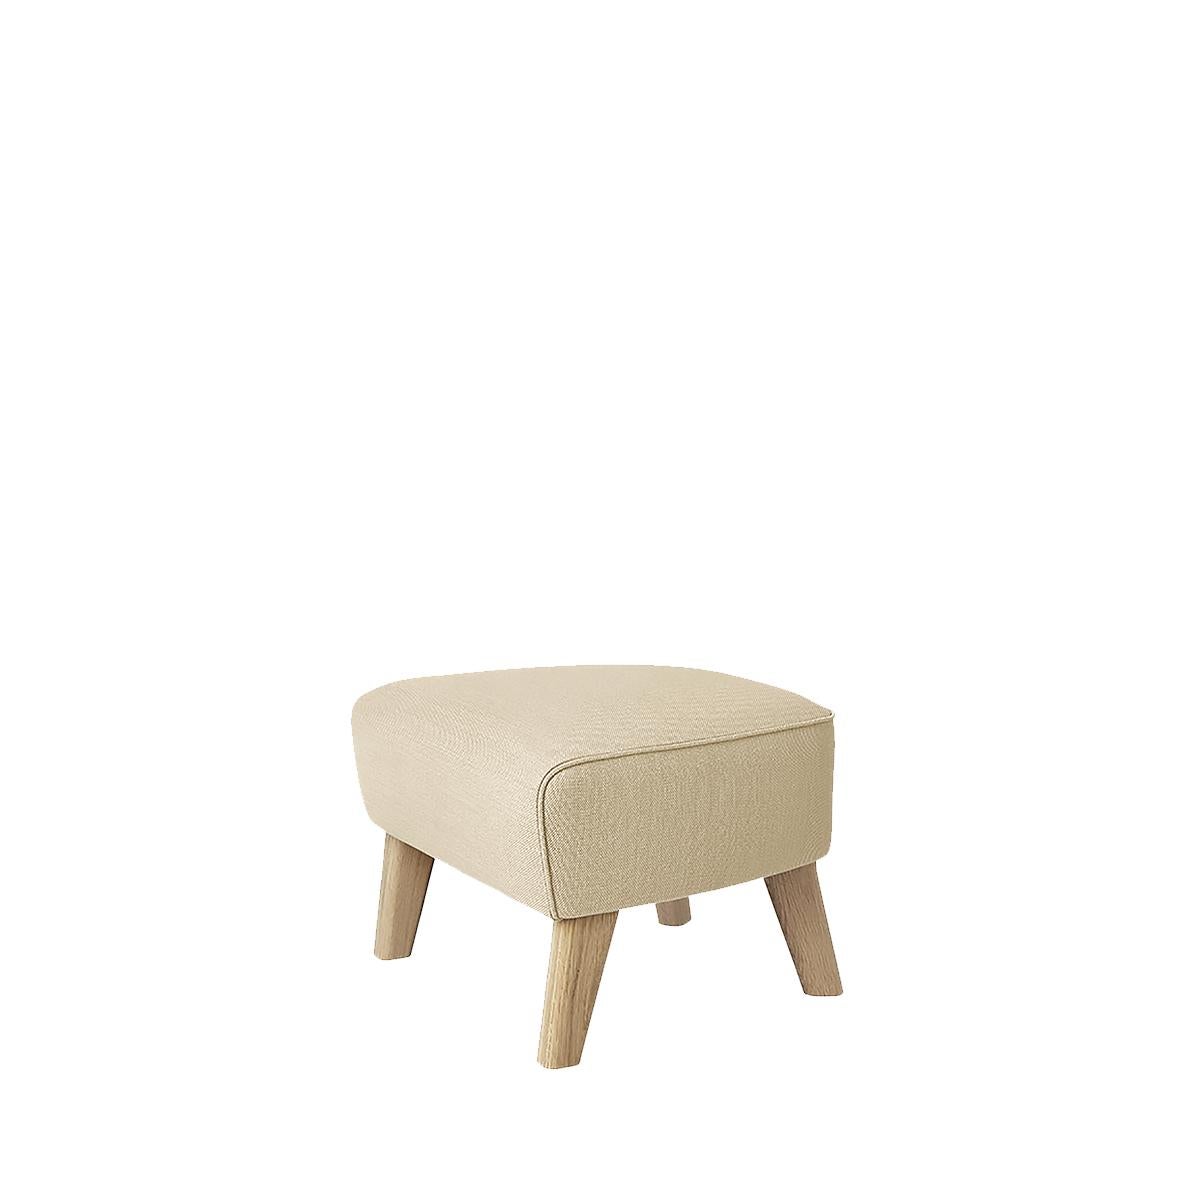 Sand and natural oak sahco zero footstool by Lassen.
Dimensions: W 56 x D 58 x H 40 cm.
Materials: Textile.
Also available: other colors available.

The my own chair footstool has been designed in the same spirit as Flemming Lassen’s original